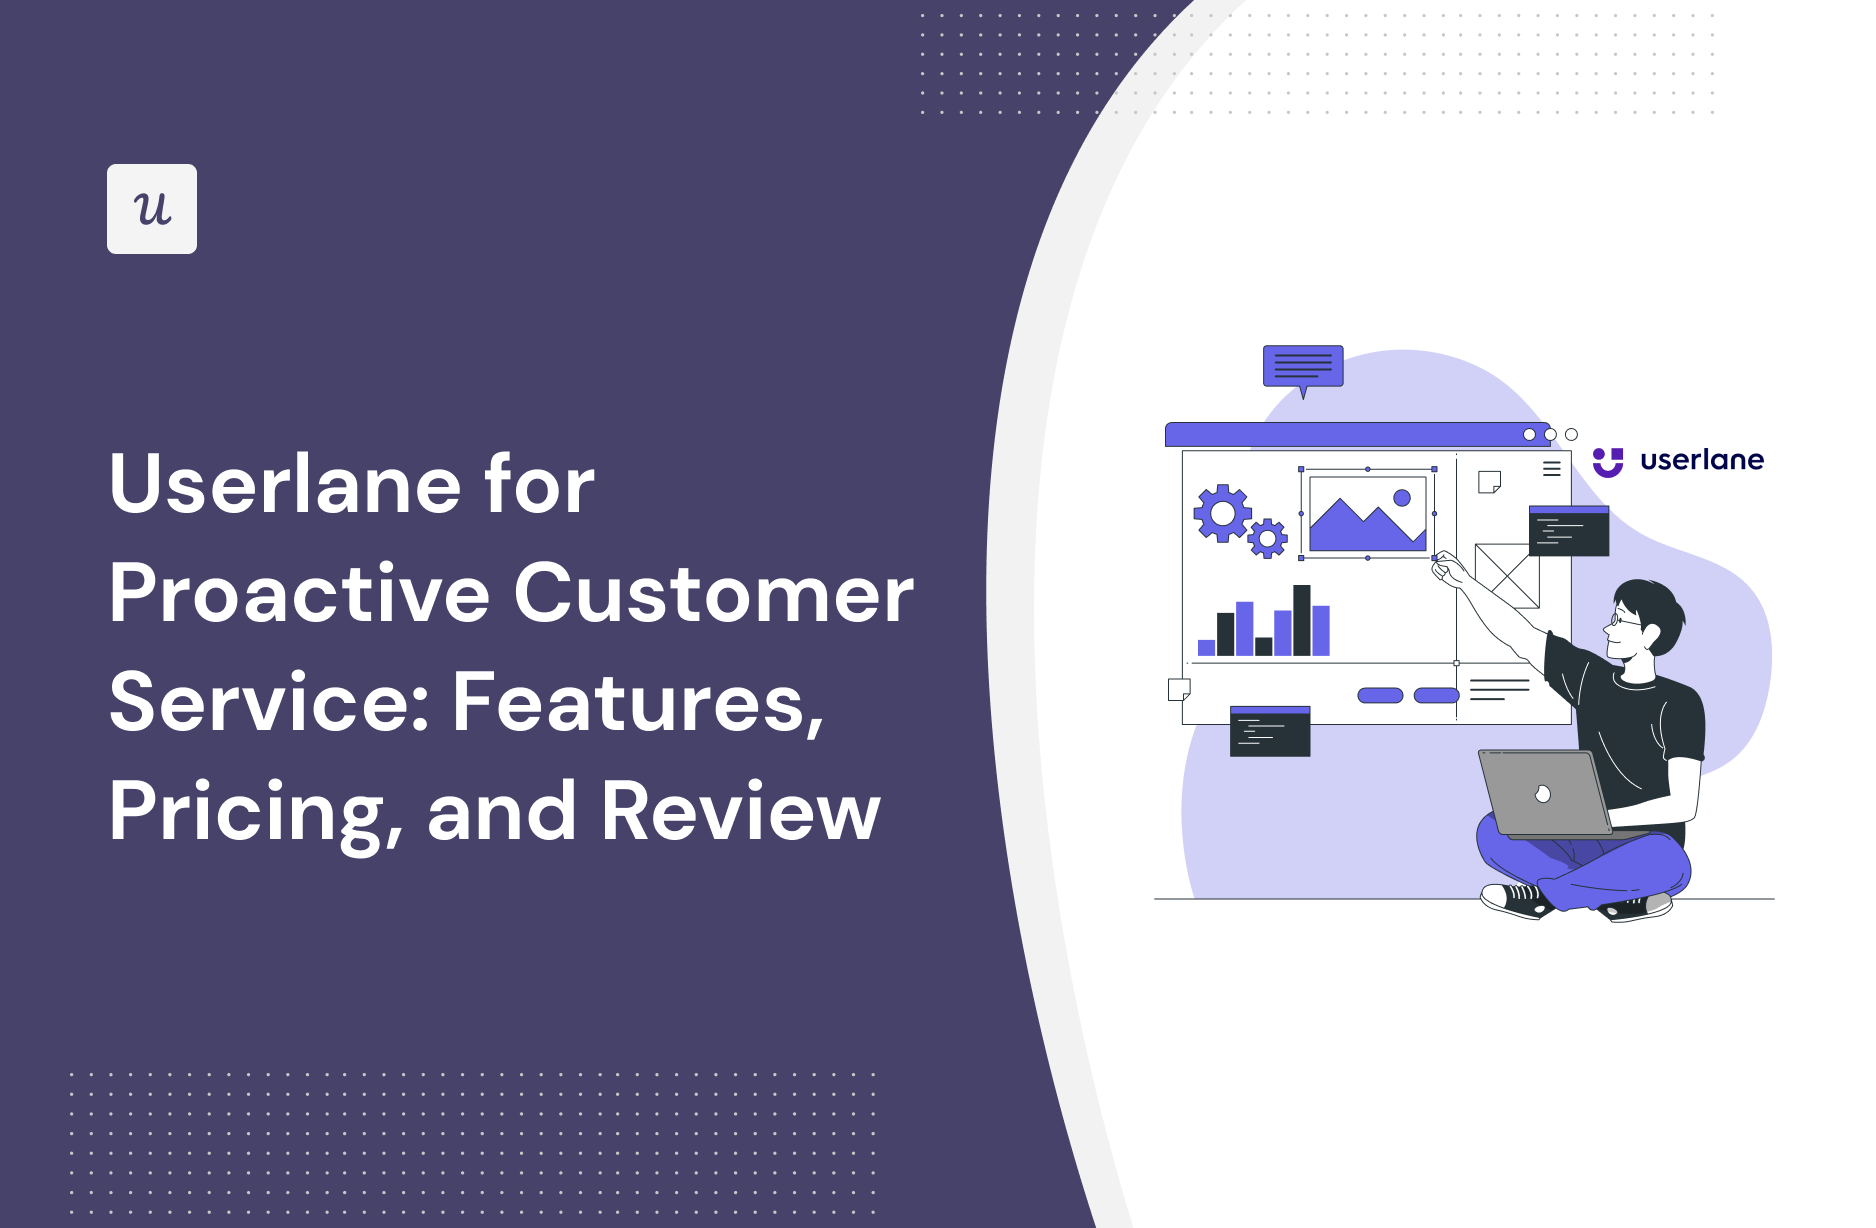 Userlane for Proactive Customer Service: Features, Pricing, and Review